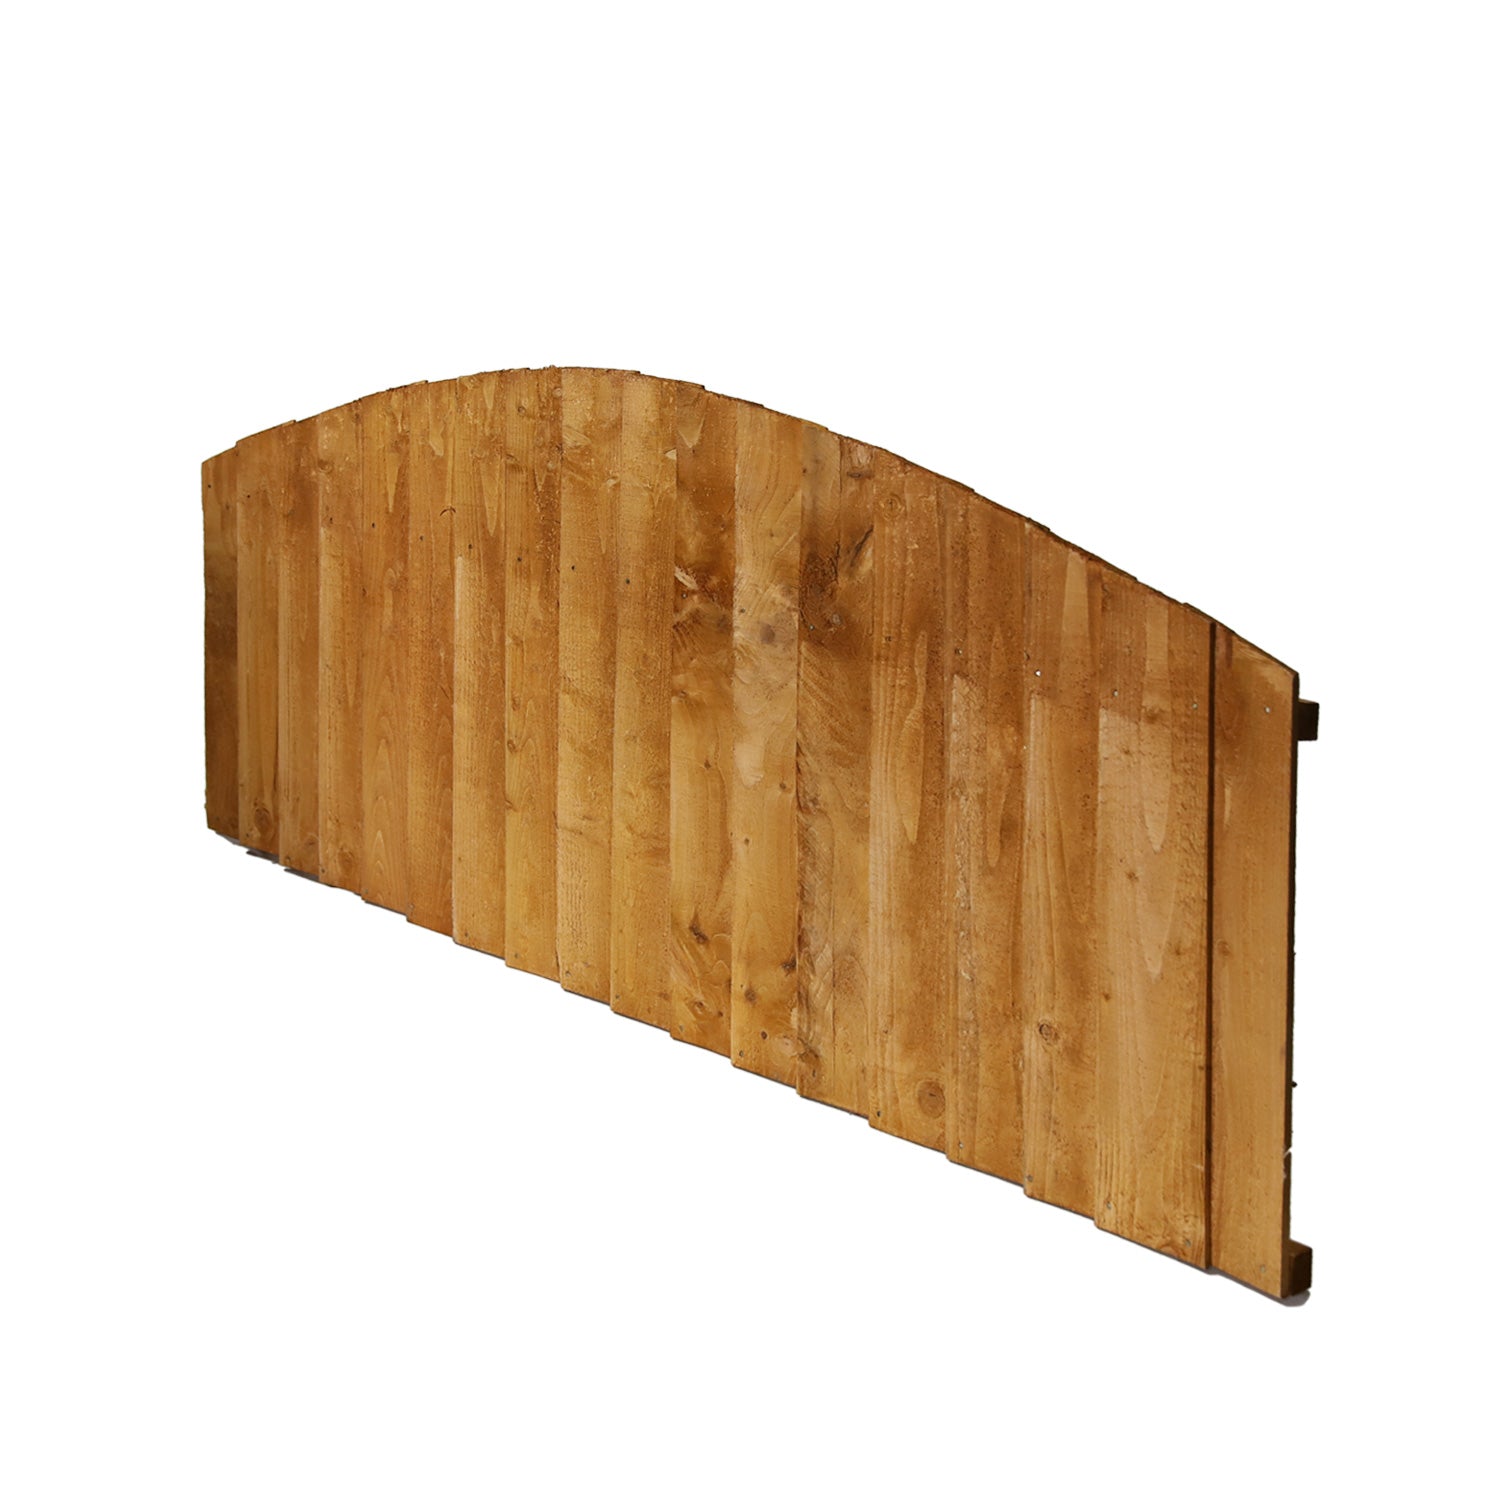 6' x 2' + Dome Featheredge Fence Panel